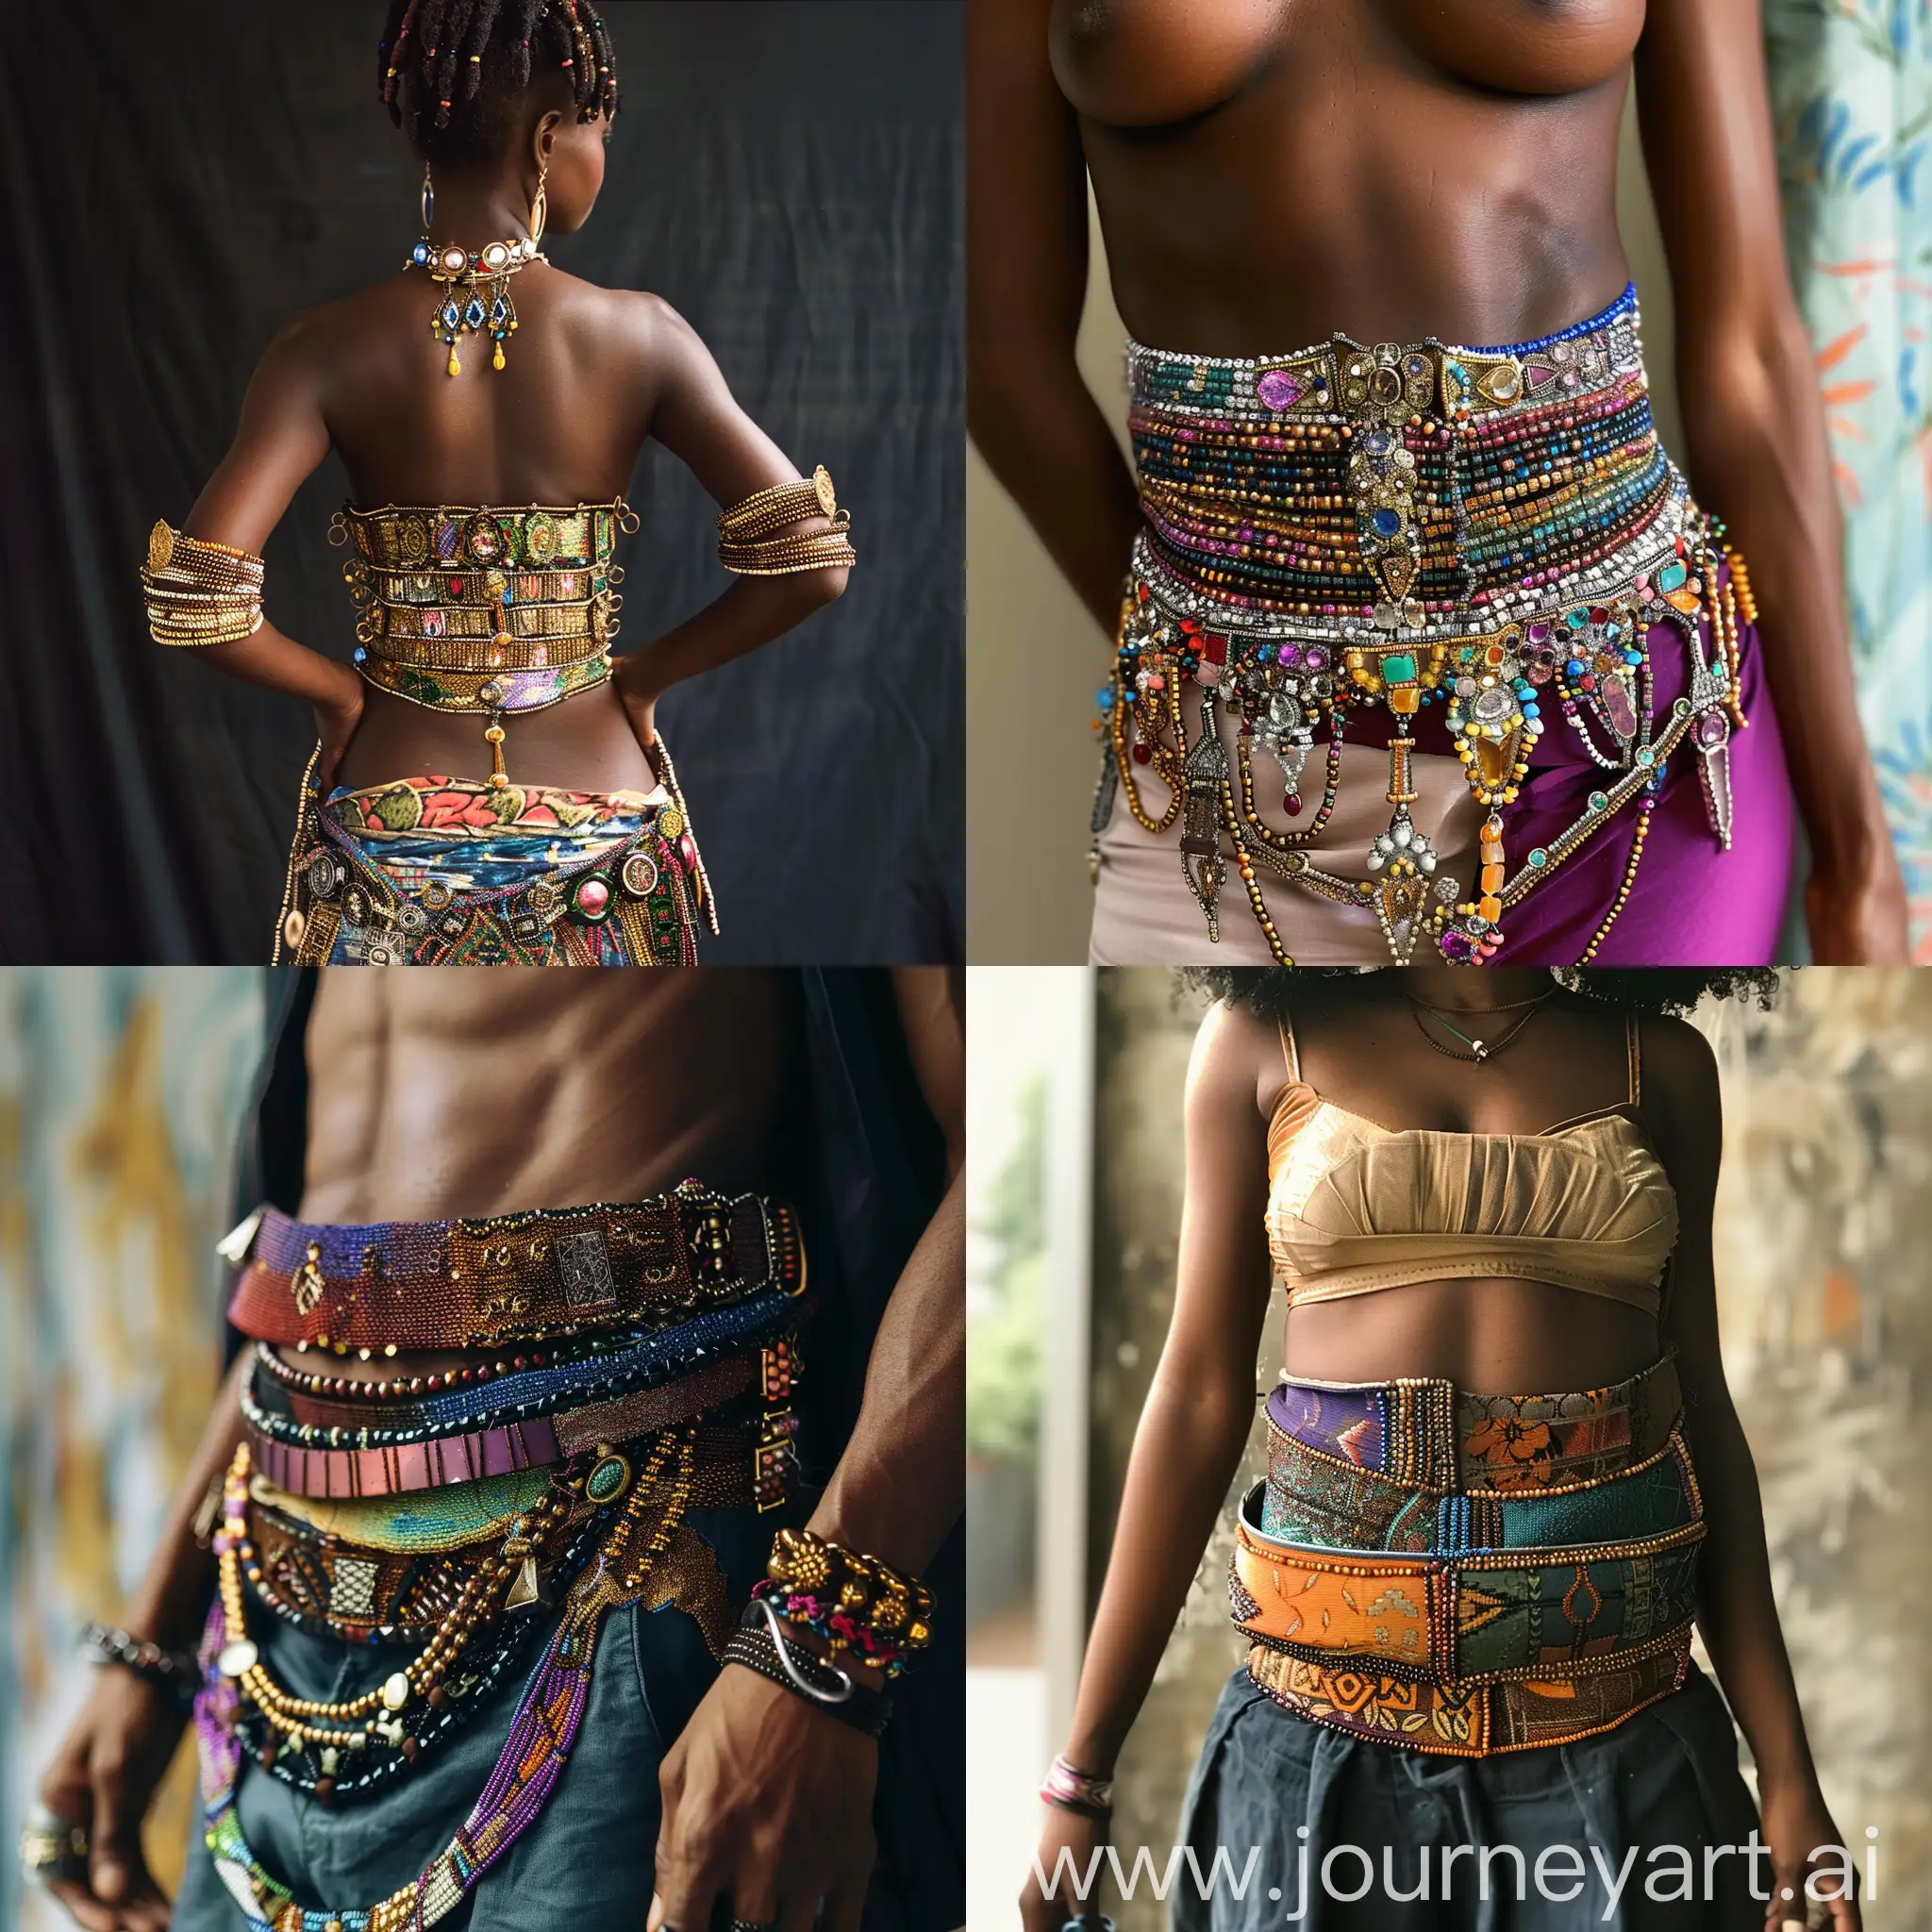 Stylish-African-American-Woman-with-Vibrant-Waistbeads-Fashion-Artistic-Portrait